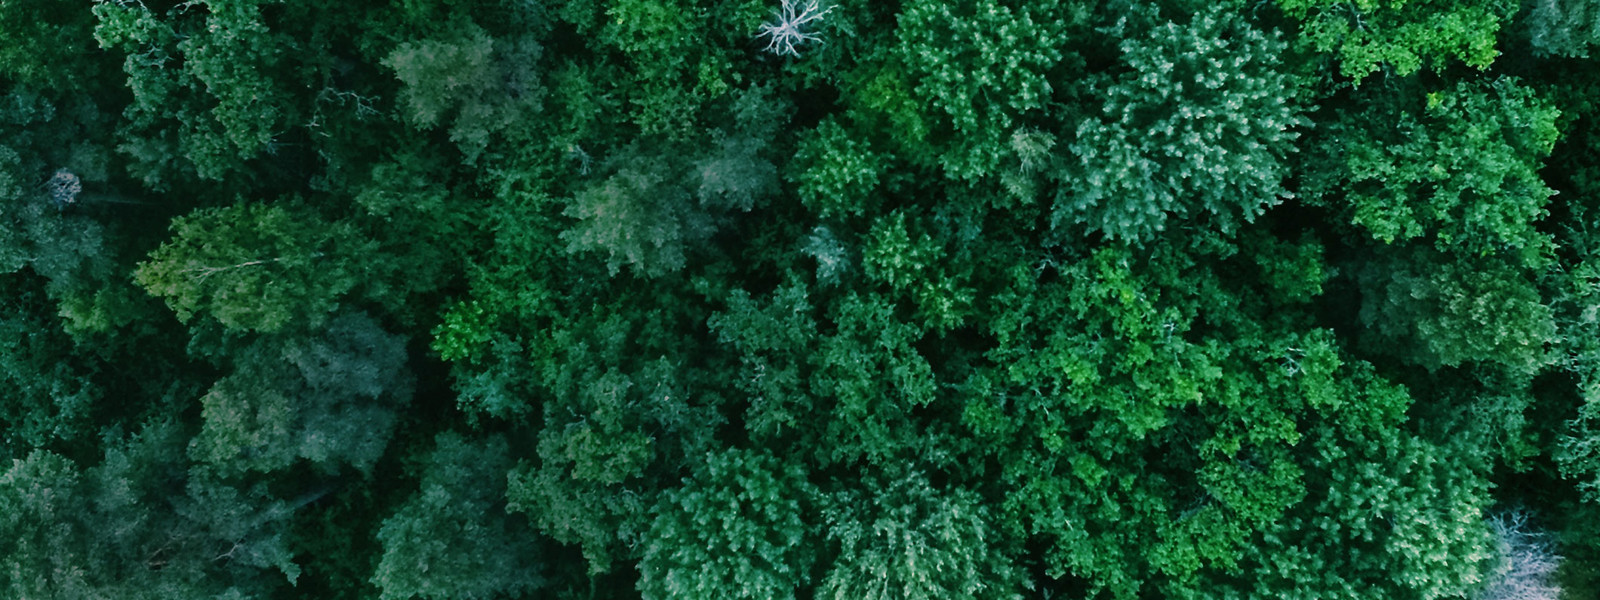 Aerial view of a lush, green forest